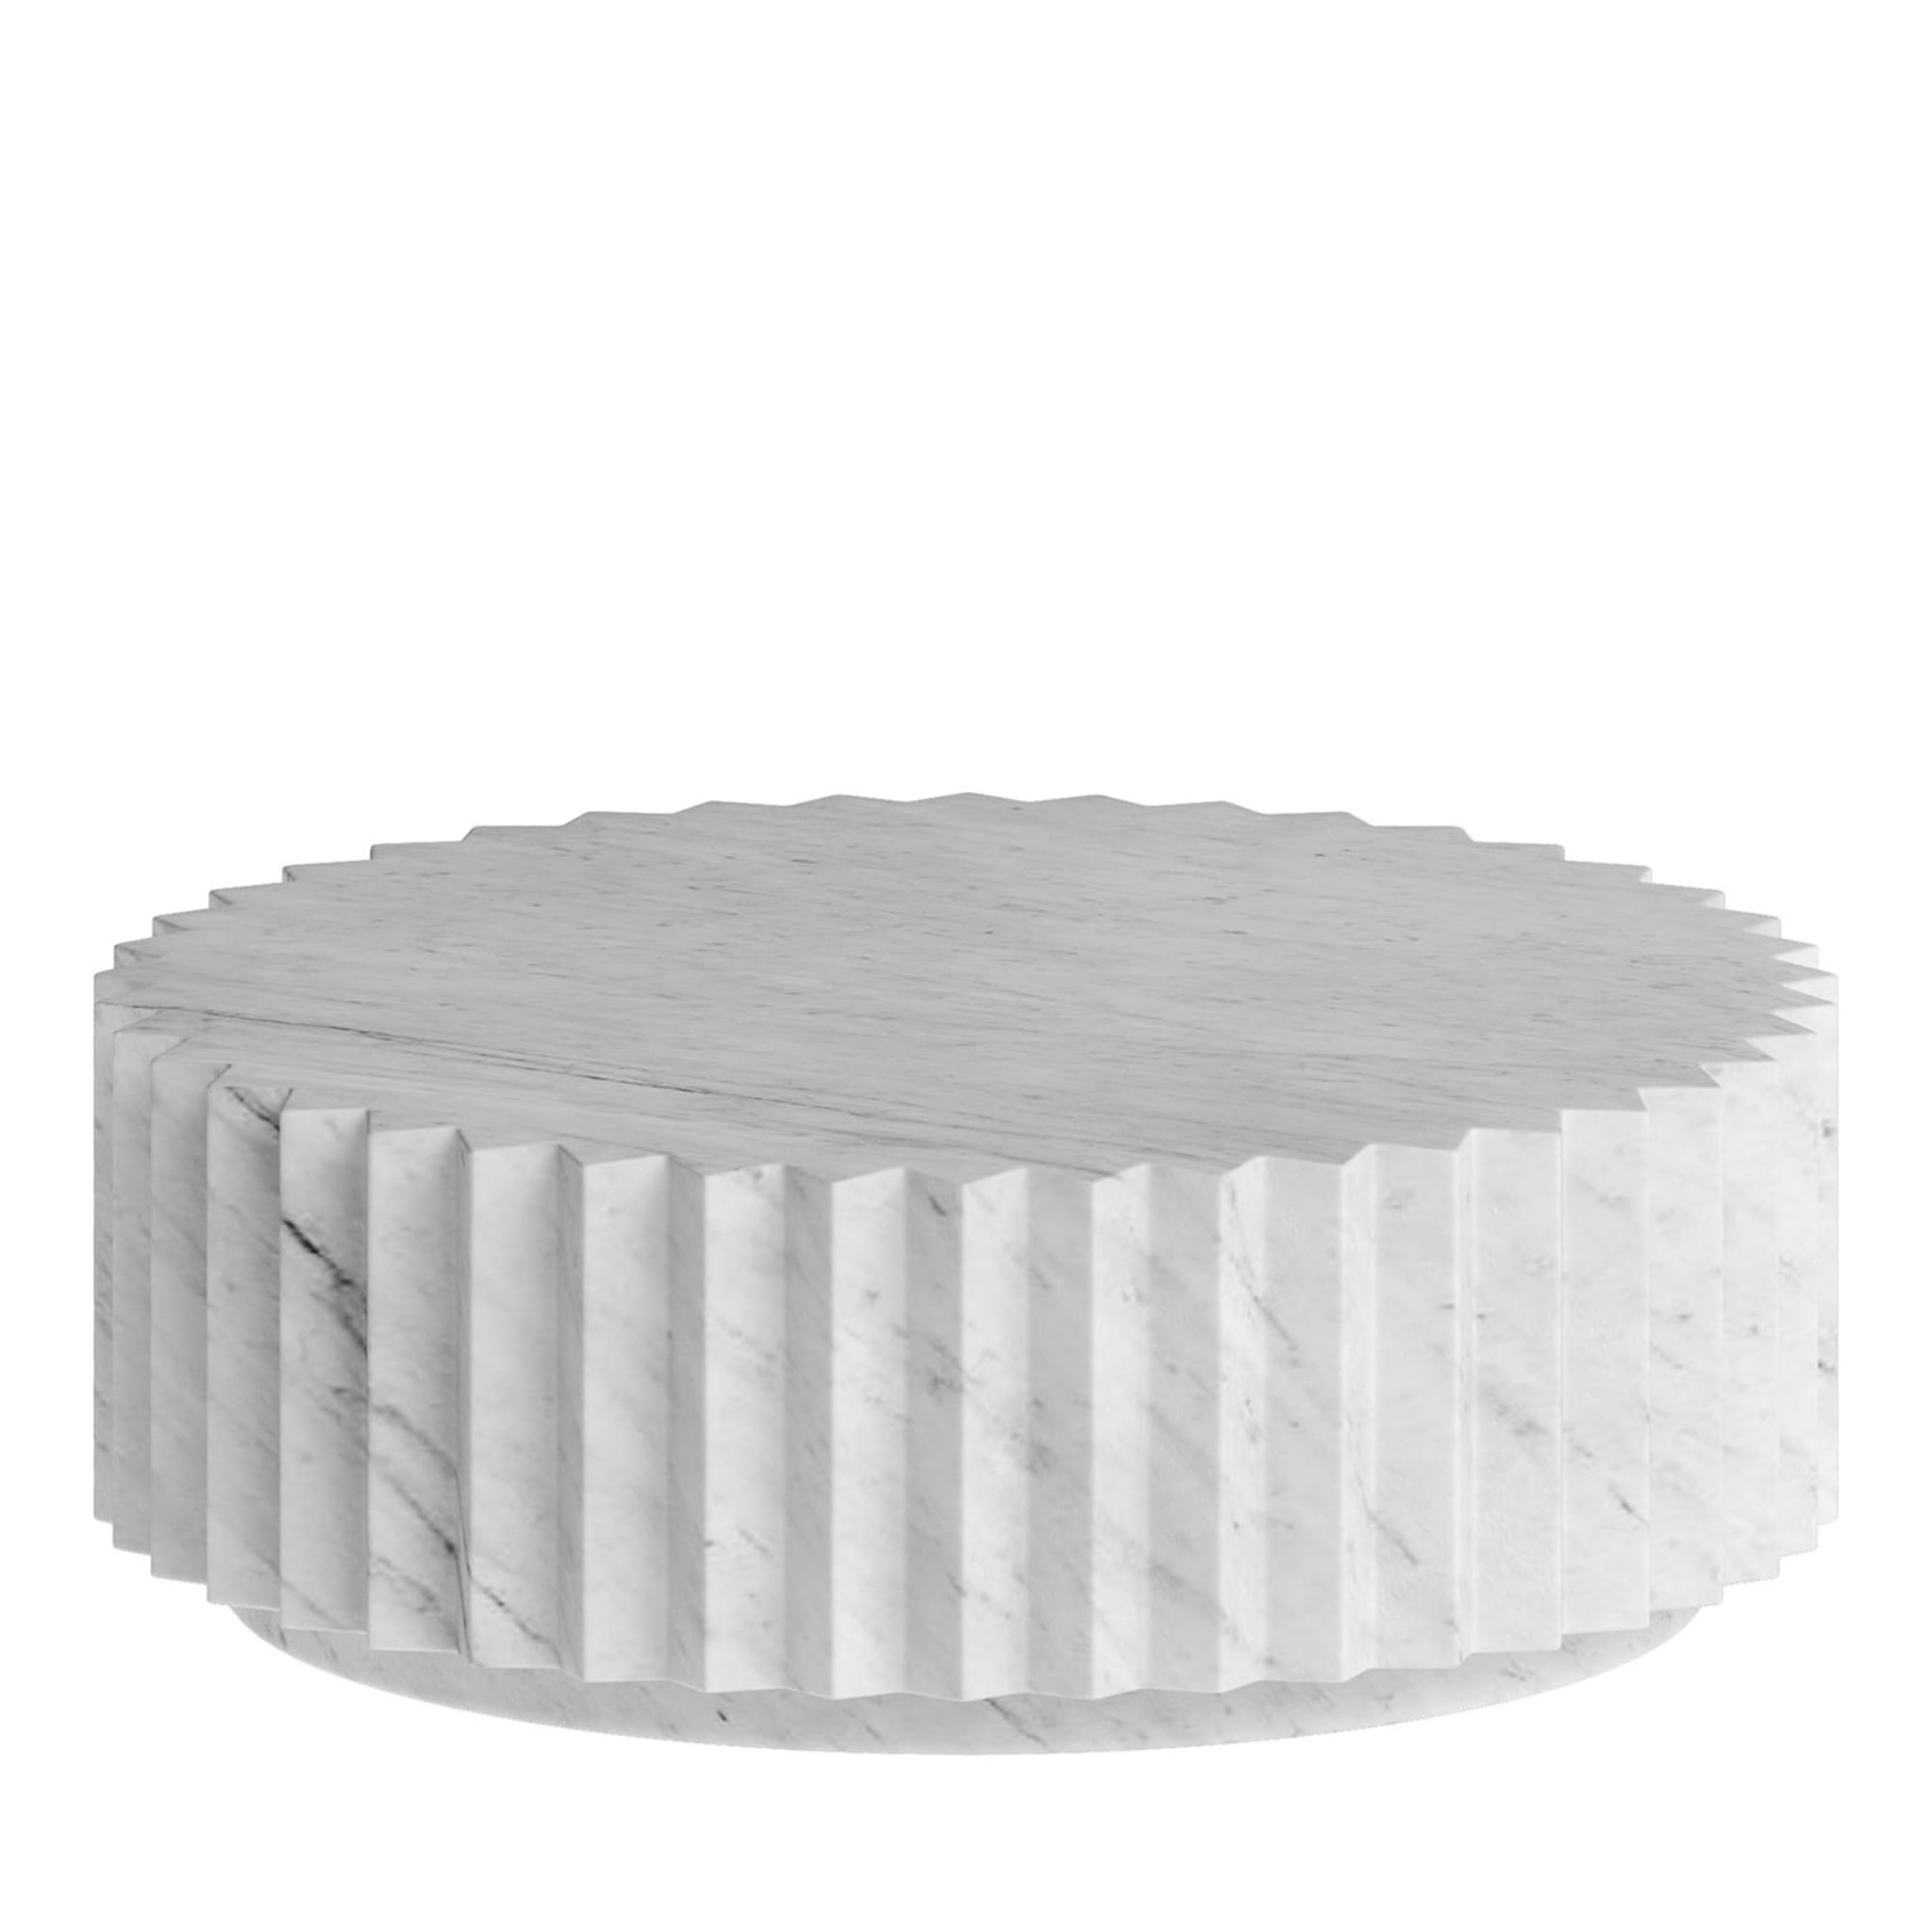 Doris Multifaceted In White Carrara Marble Coffee Table  - Main view